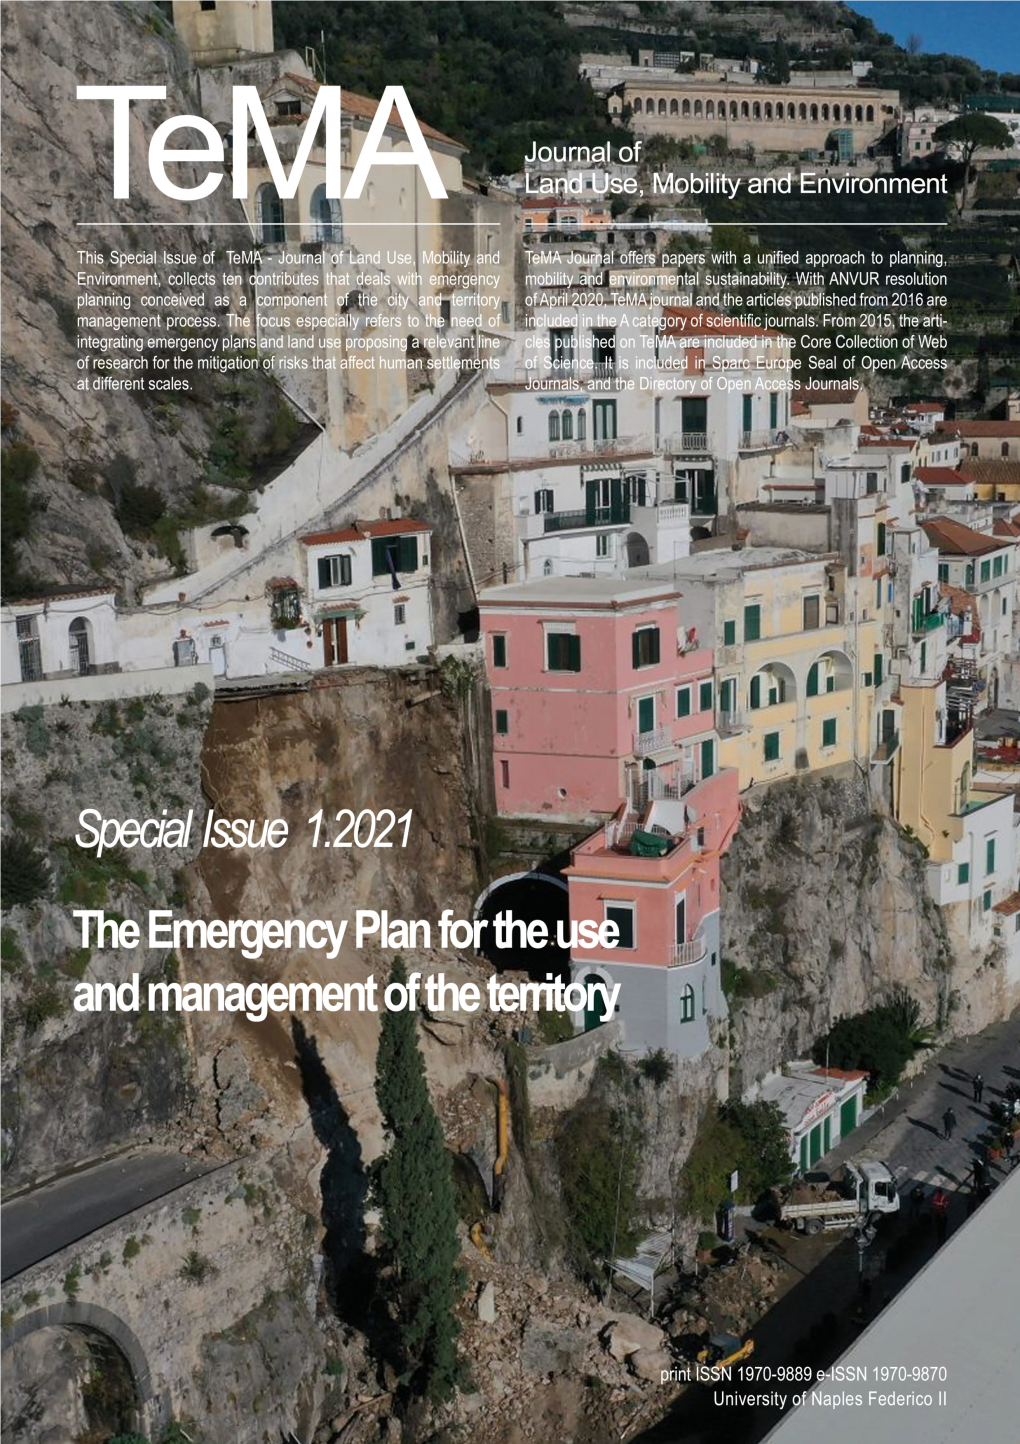 Special Issue 1.2021 the EMERGENCY PLAN for the USE and MANAGEMENT of the TERRITORY